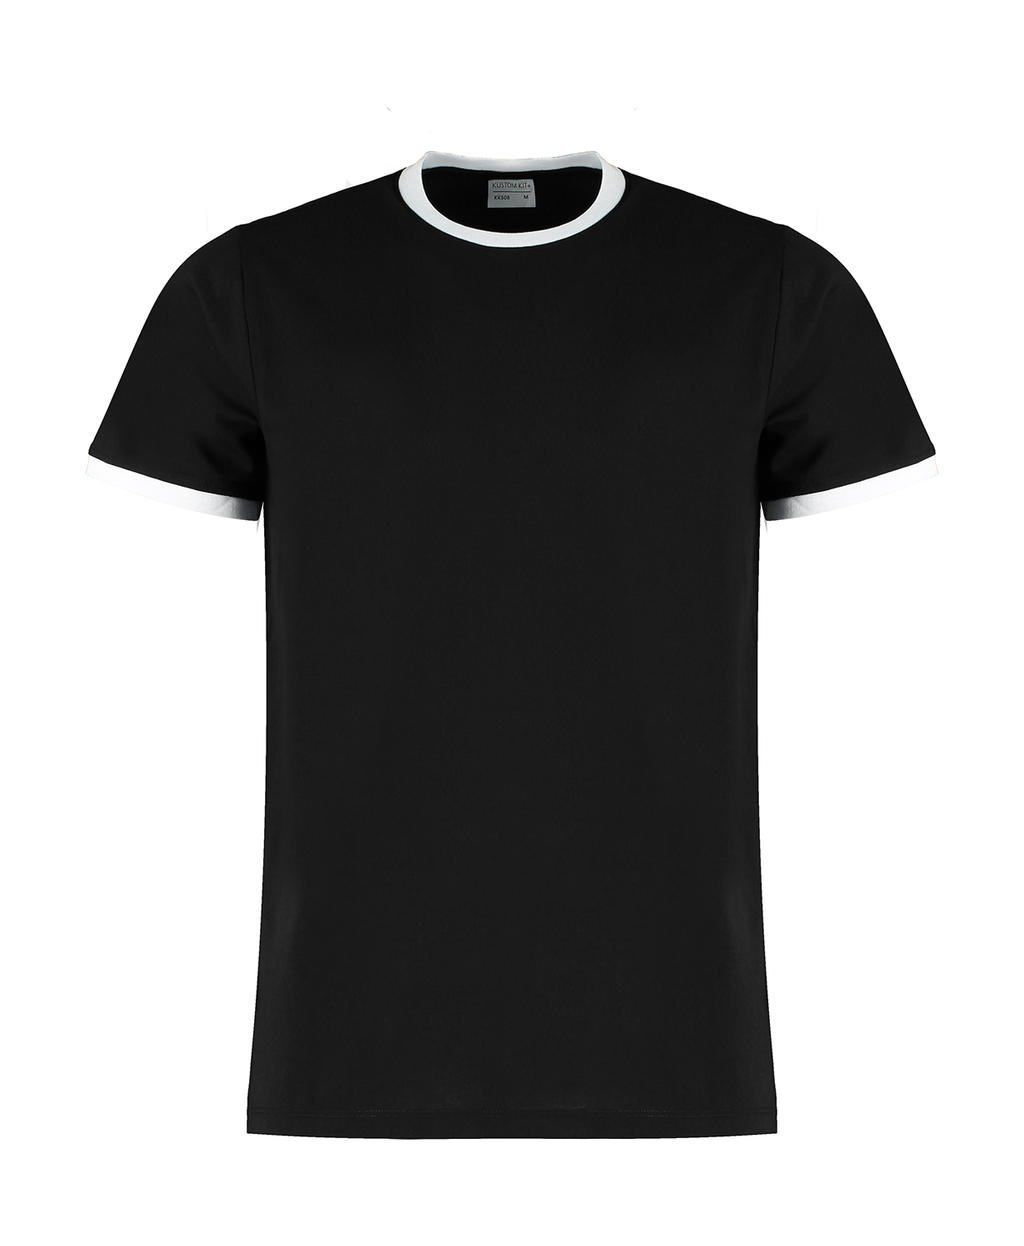  Fashion Fit Ringer Tee in Farbe Black/White